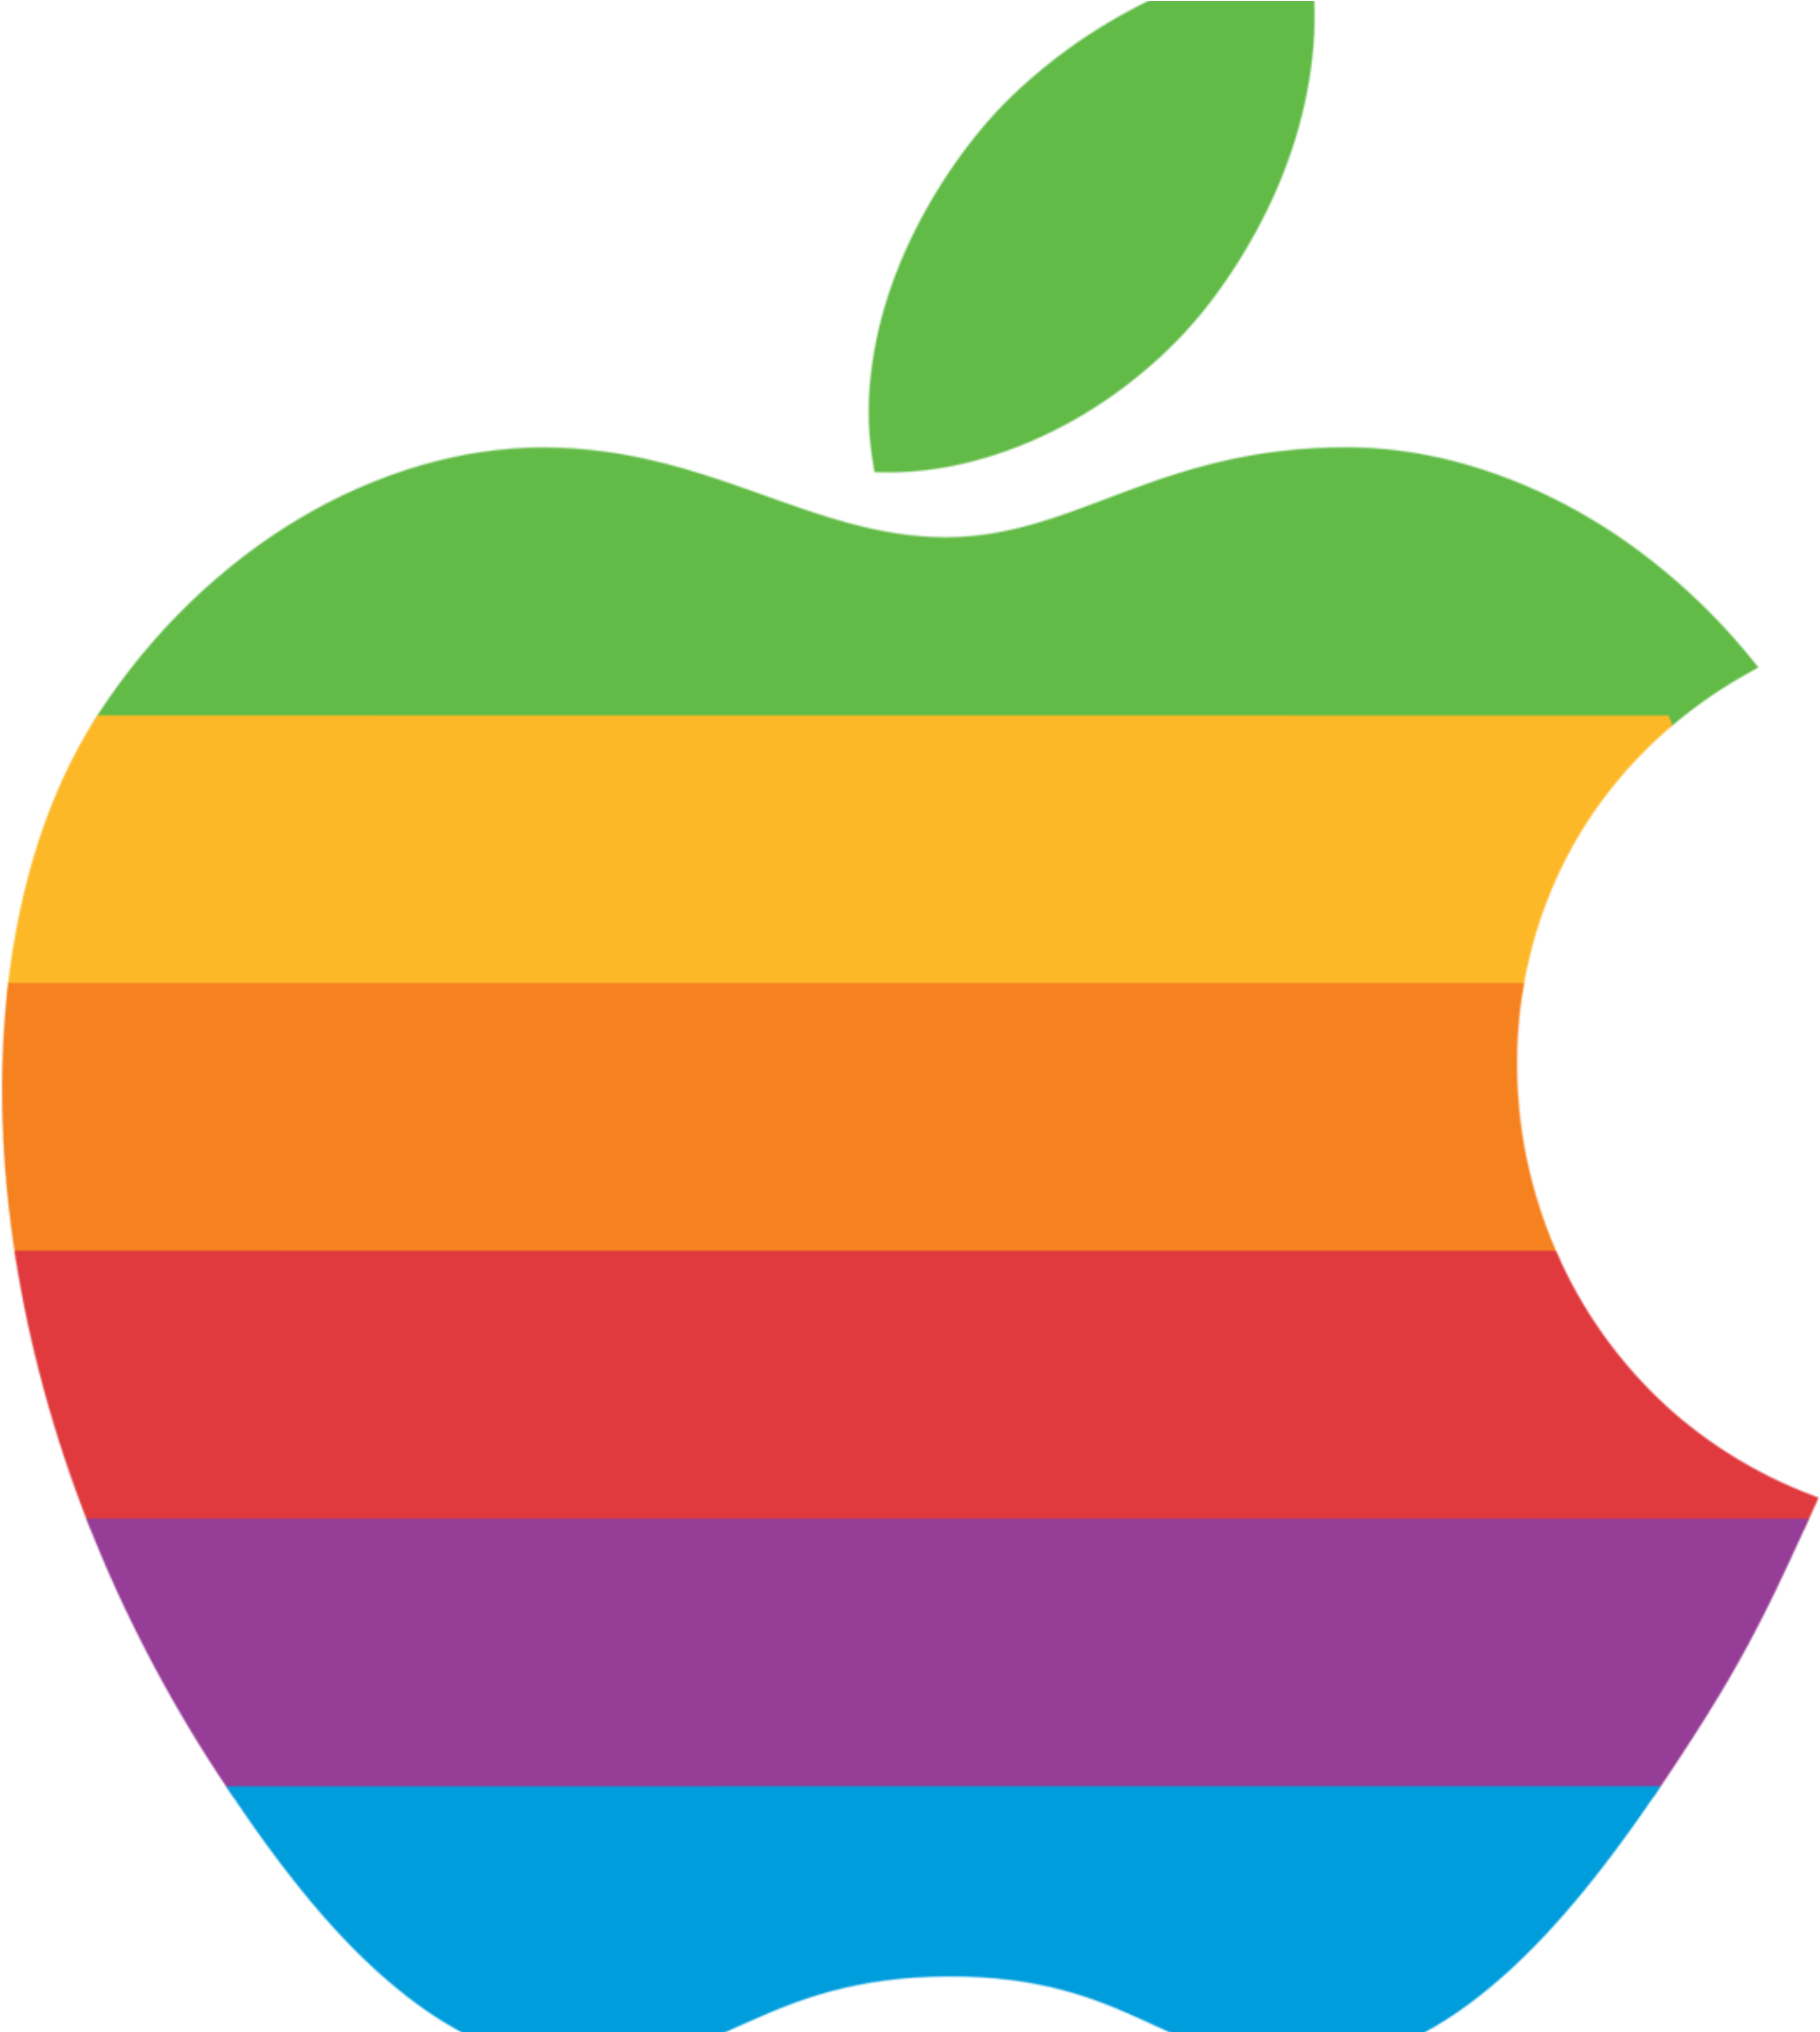 Related To Colored Apple Logo - Apple Rainbow Logo Png (2048x2048)